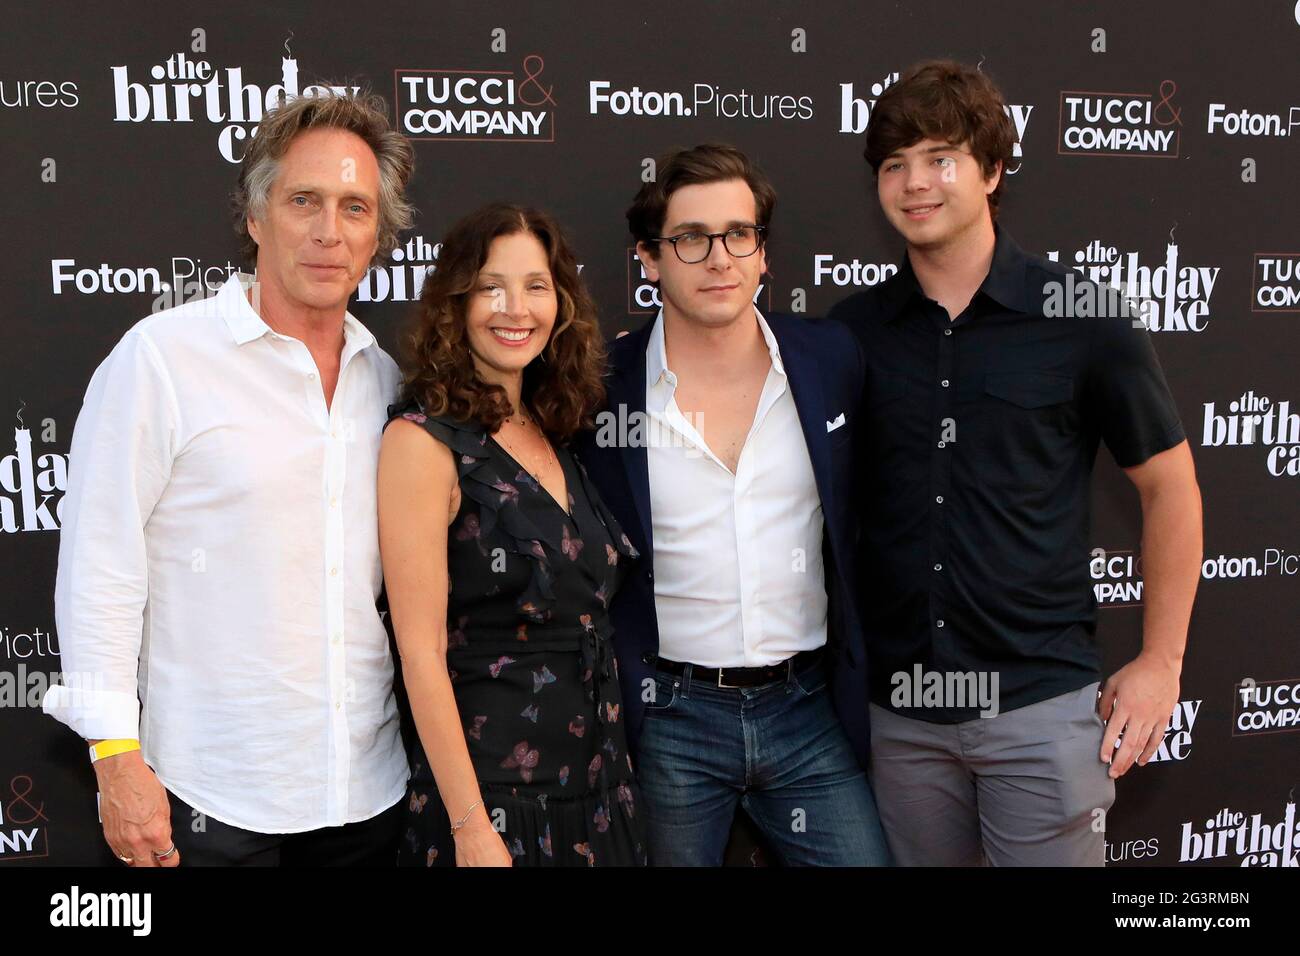 June 16, 2021, Beverly Hills, CA, USA: LOS ANGELES - MAR 24:  William Fichtner, Kymberly Kalil, Sam Fichtner, , Van Fichtner at The Birthday Cake LA Premiere at the Fine Arts Theater on March 24, 2021 in Beverly Hills, CA (Credit Image: © Kay Blake/ZUMA Wire) Stock Photo